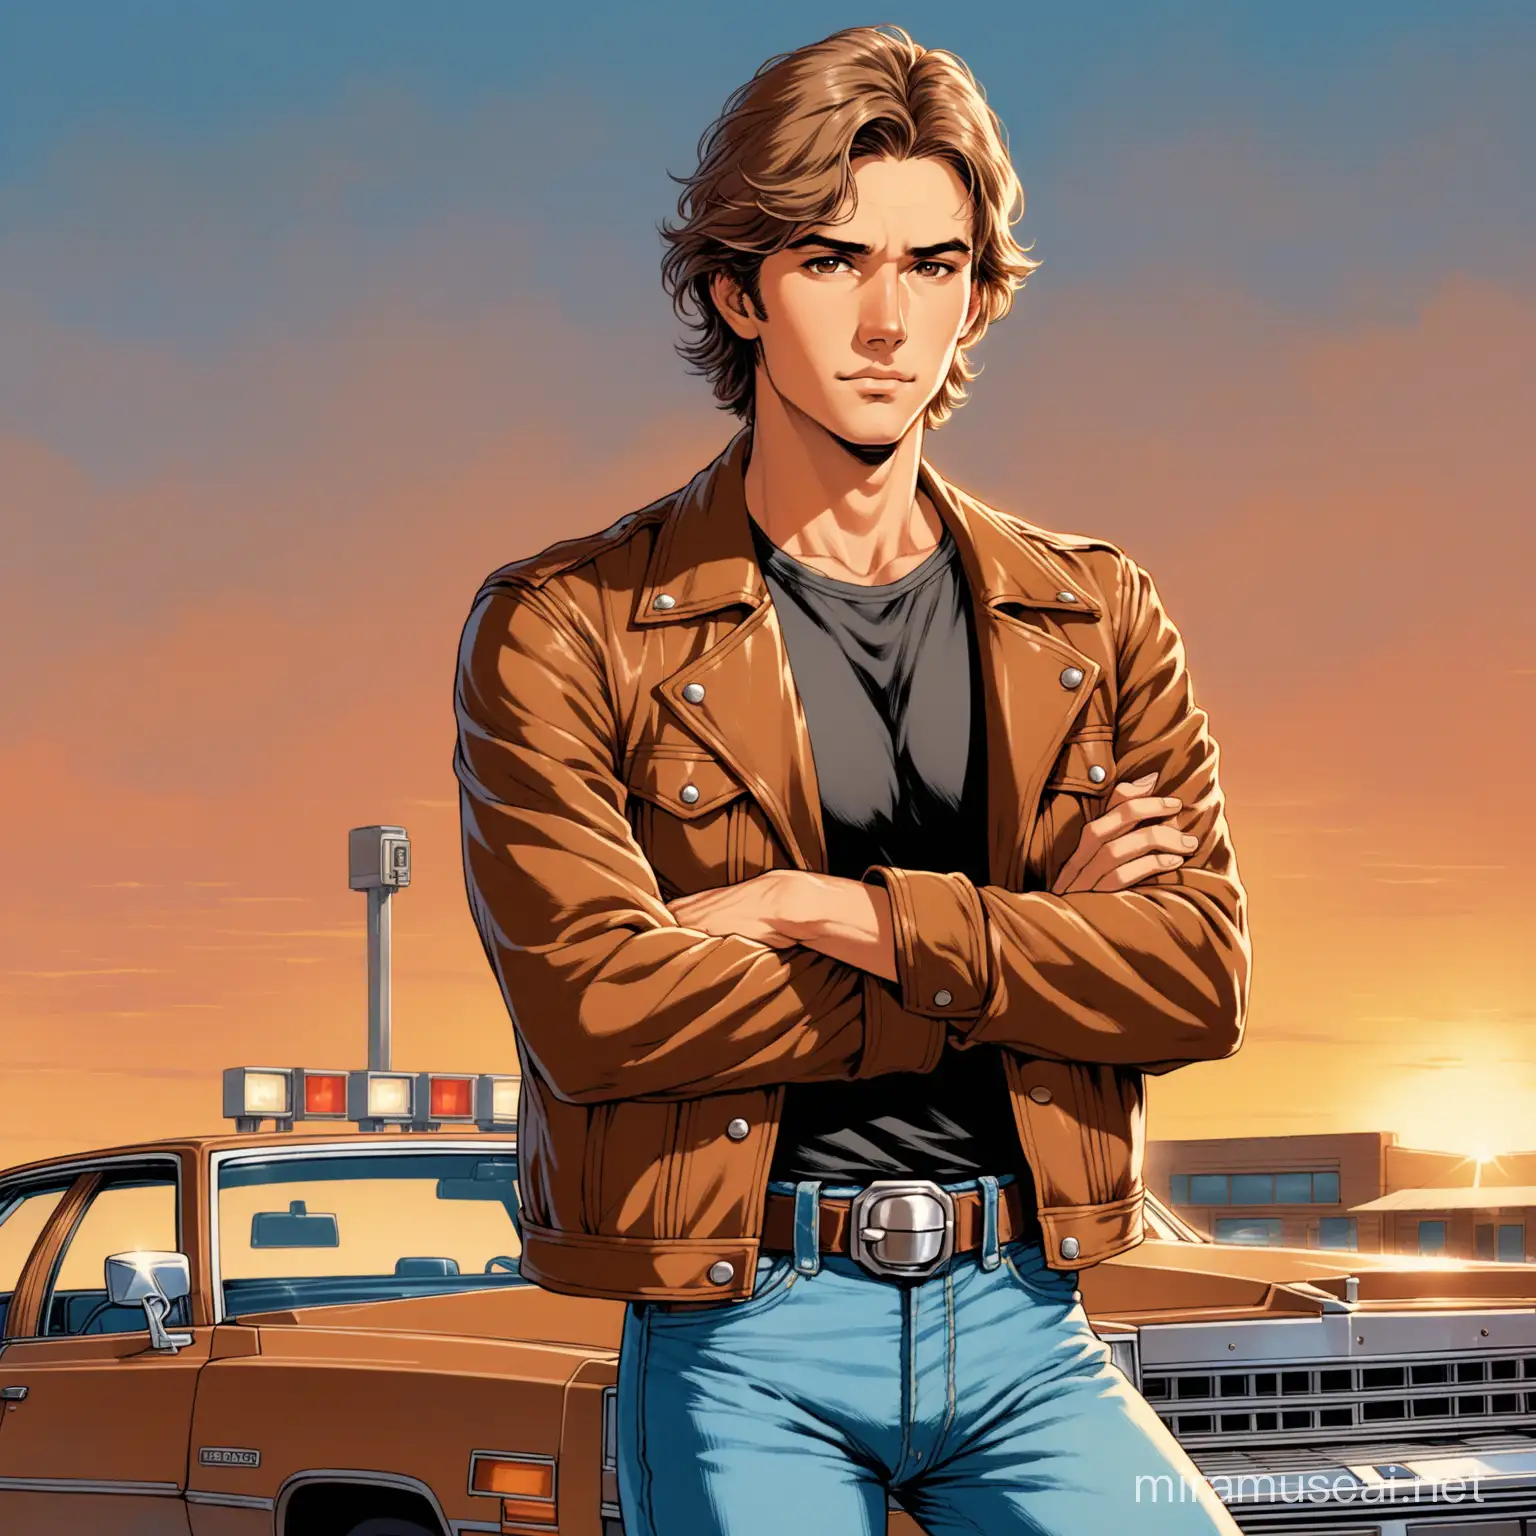 A very handsome American from Texas semi-realism art-style man in almost semi-anime-like, late thirty, typical 1980s clothes, brown leather jacket, faded blue jeans, dark t-shirt, brown eyes, very short light brown with one gray lock hair, revolver tucked in holster. Standing, crossed arms on chest, at a gas station/dinner in summer 1980s Texas.